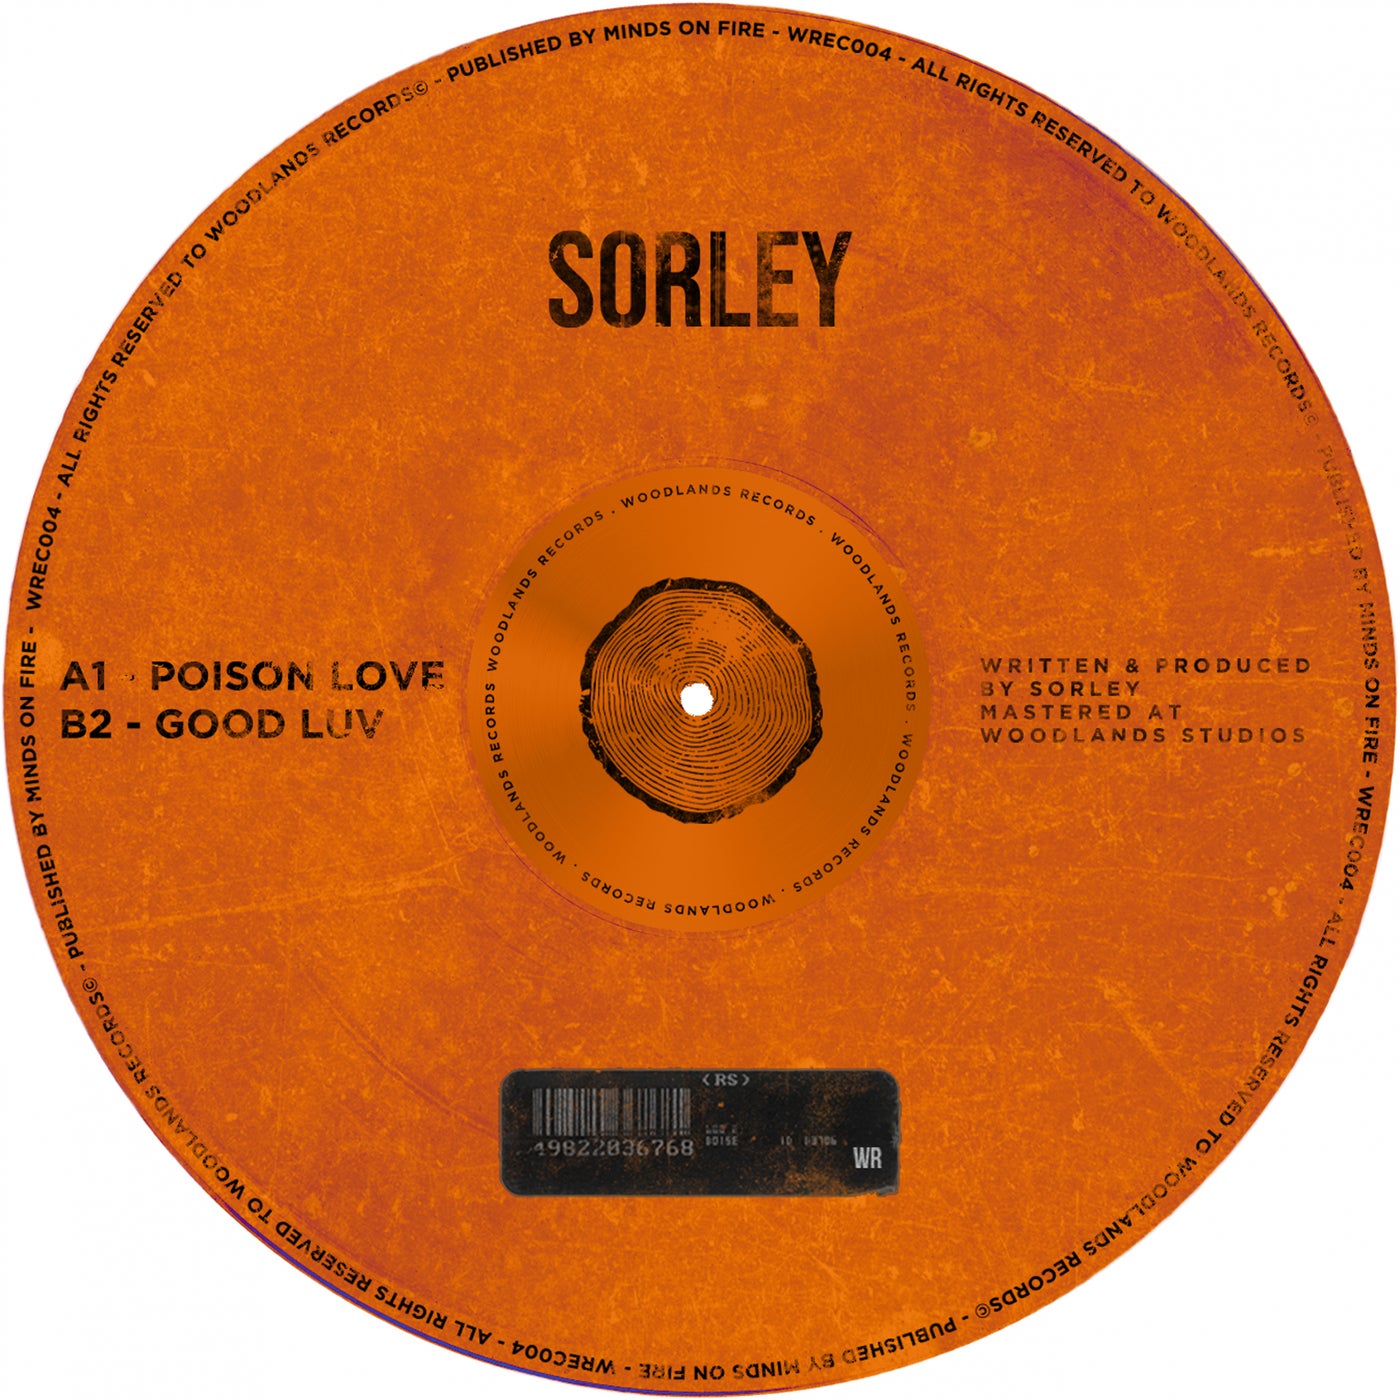 Sorley - A Tale of Two Hearts [WREC004E]